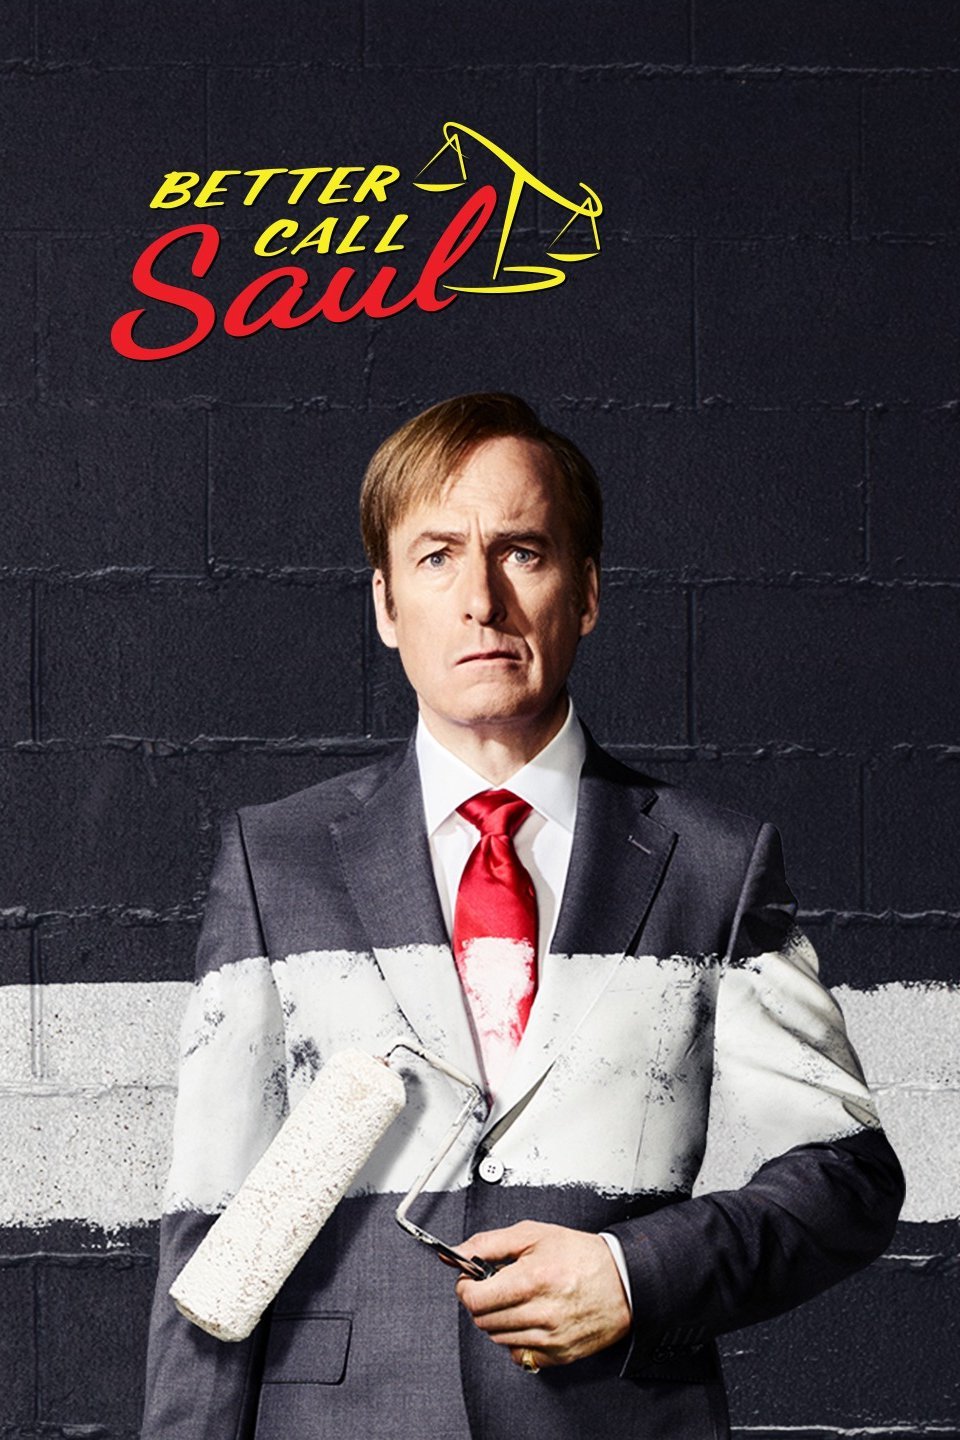 [MULTI] [Drama] Better Call Saul S01S06 2160p NF WEBDL DDP5.1 H.265